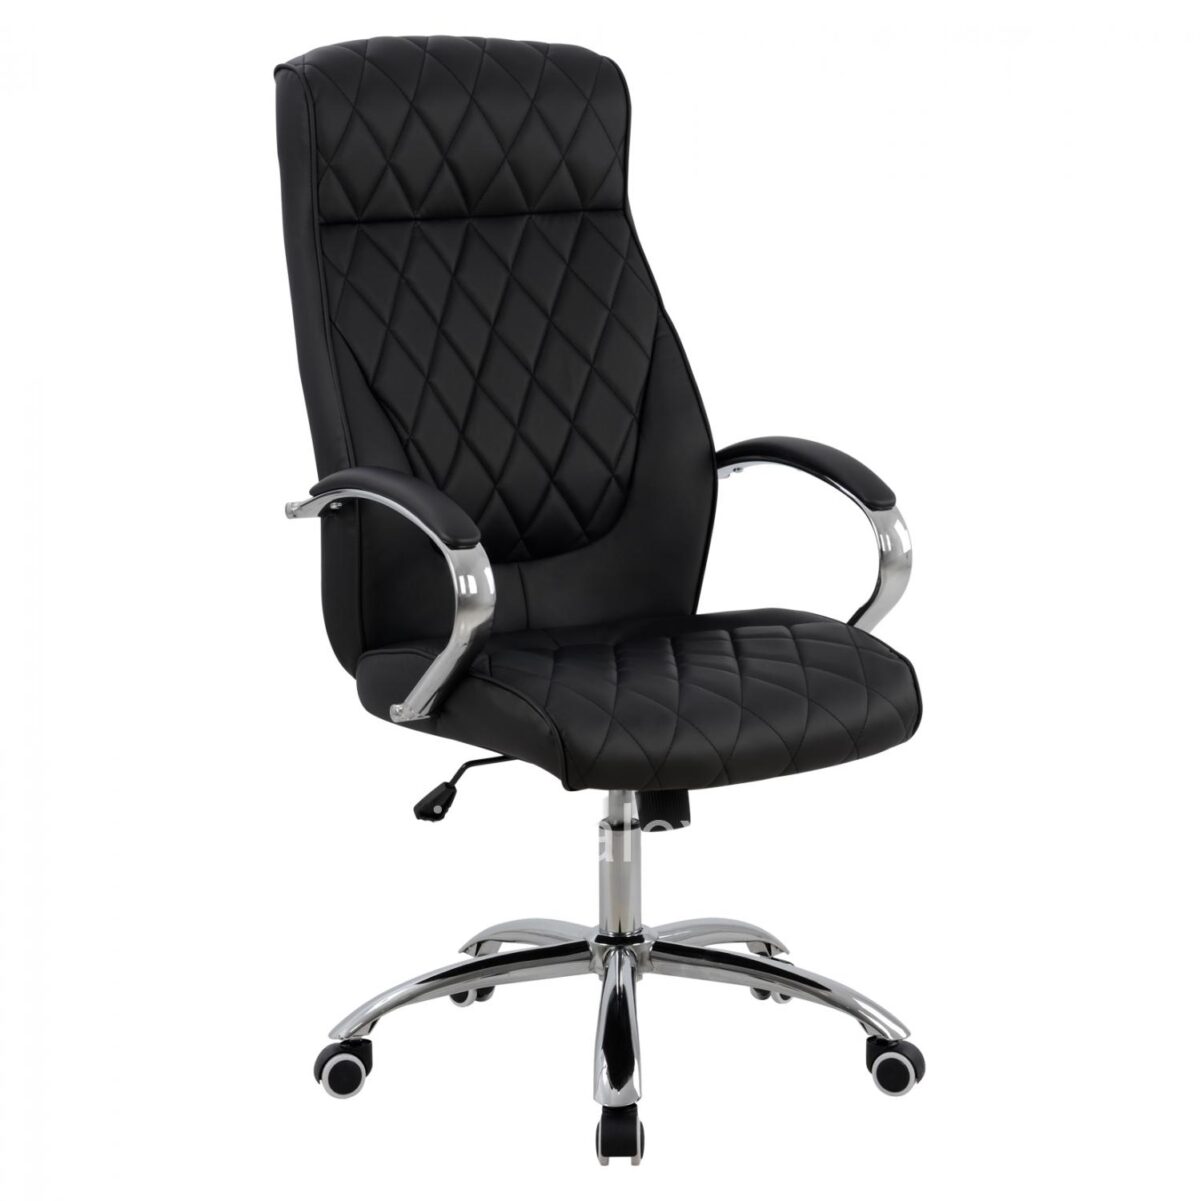 Manager's office chair HM1098.01 Black 62x80x125cm